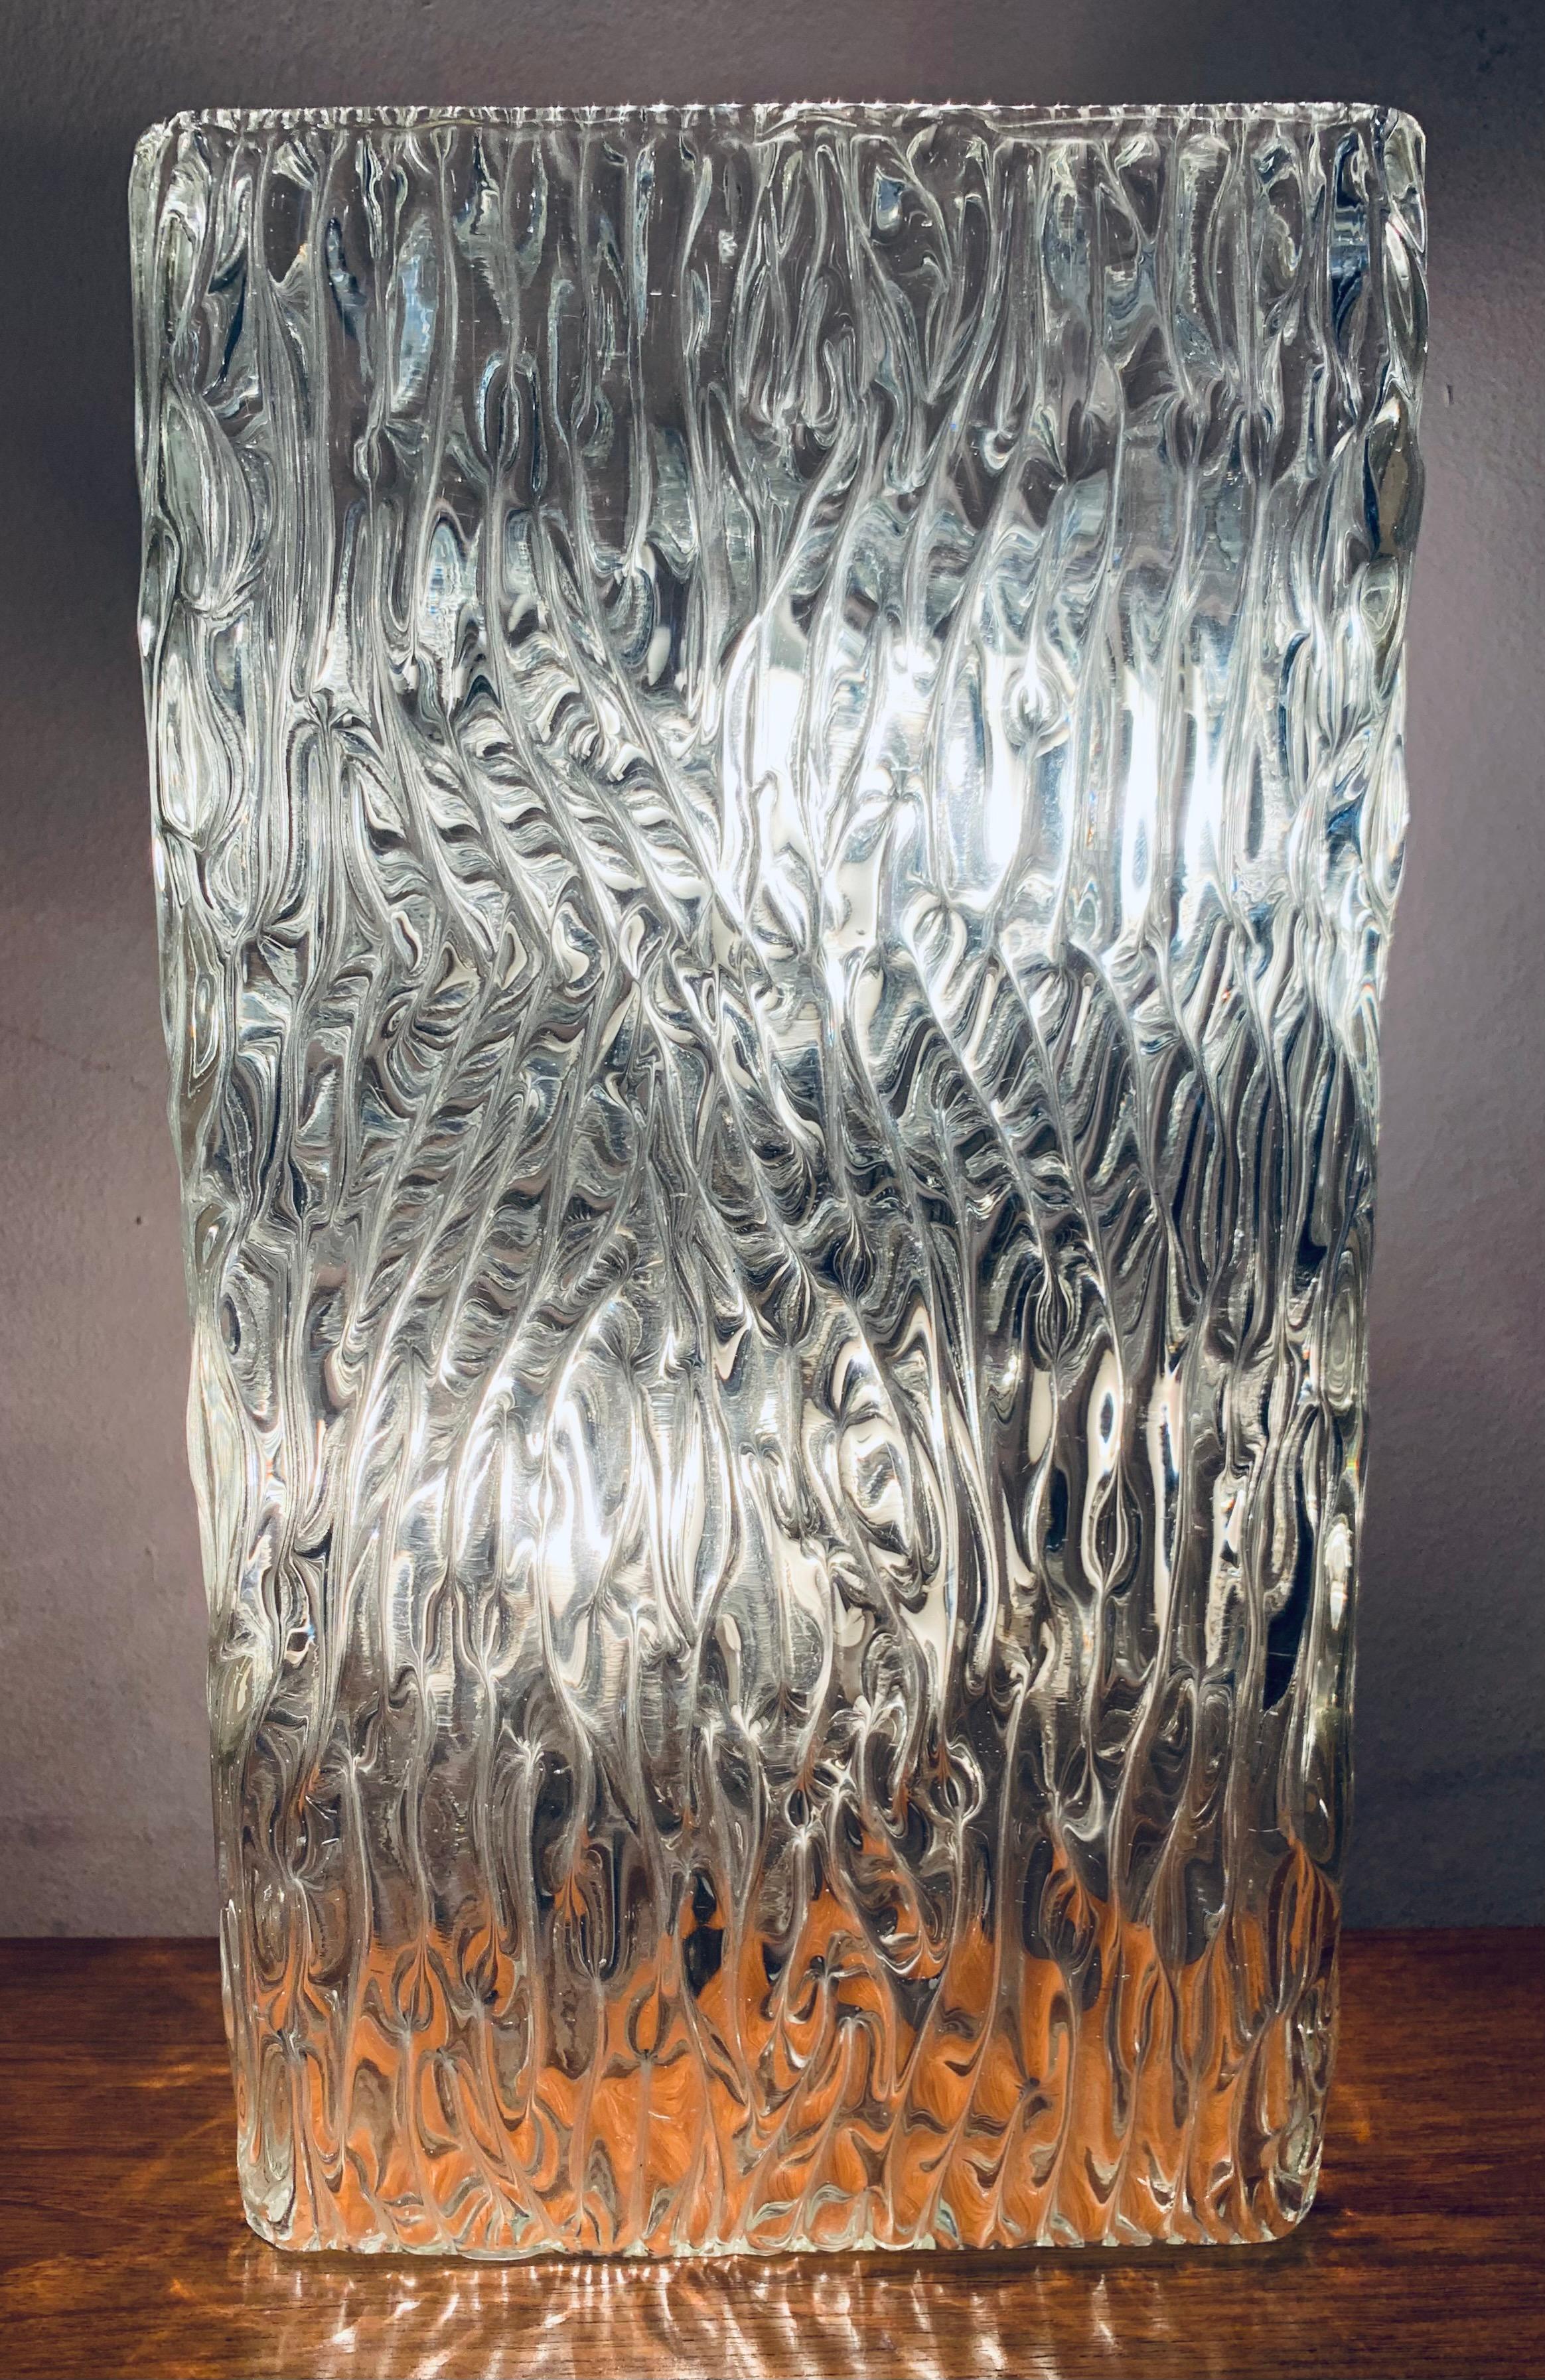 Large 1960s wall light or wall sconce designed by J.T. Kalmar and manufactured by Kalmar Lighting in Vienna, Austria. The sculpted, textured, molded glass has a wave pattern covering its entire outside surface which produces a warm diffused light.